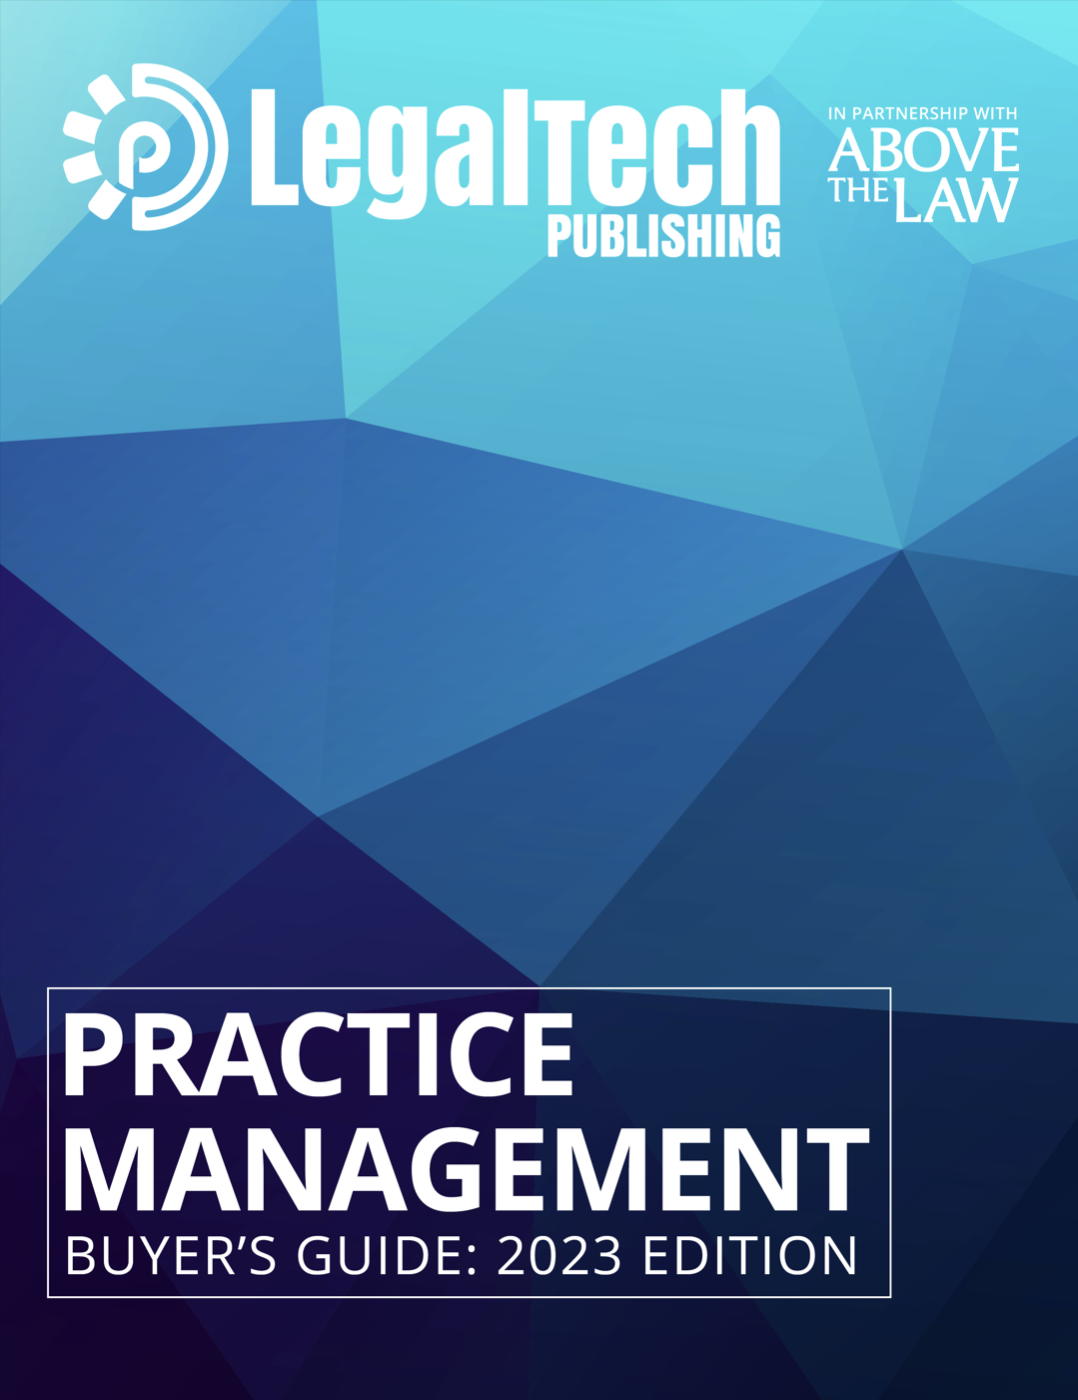 Practice Management Software for Law Firms